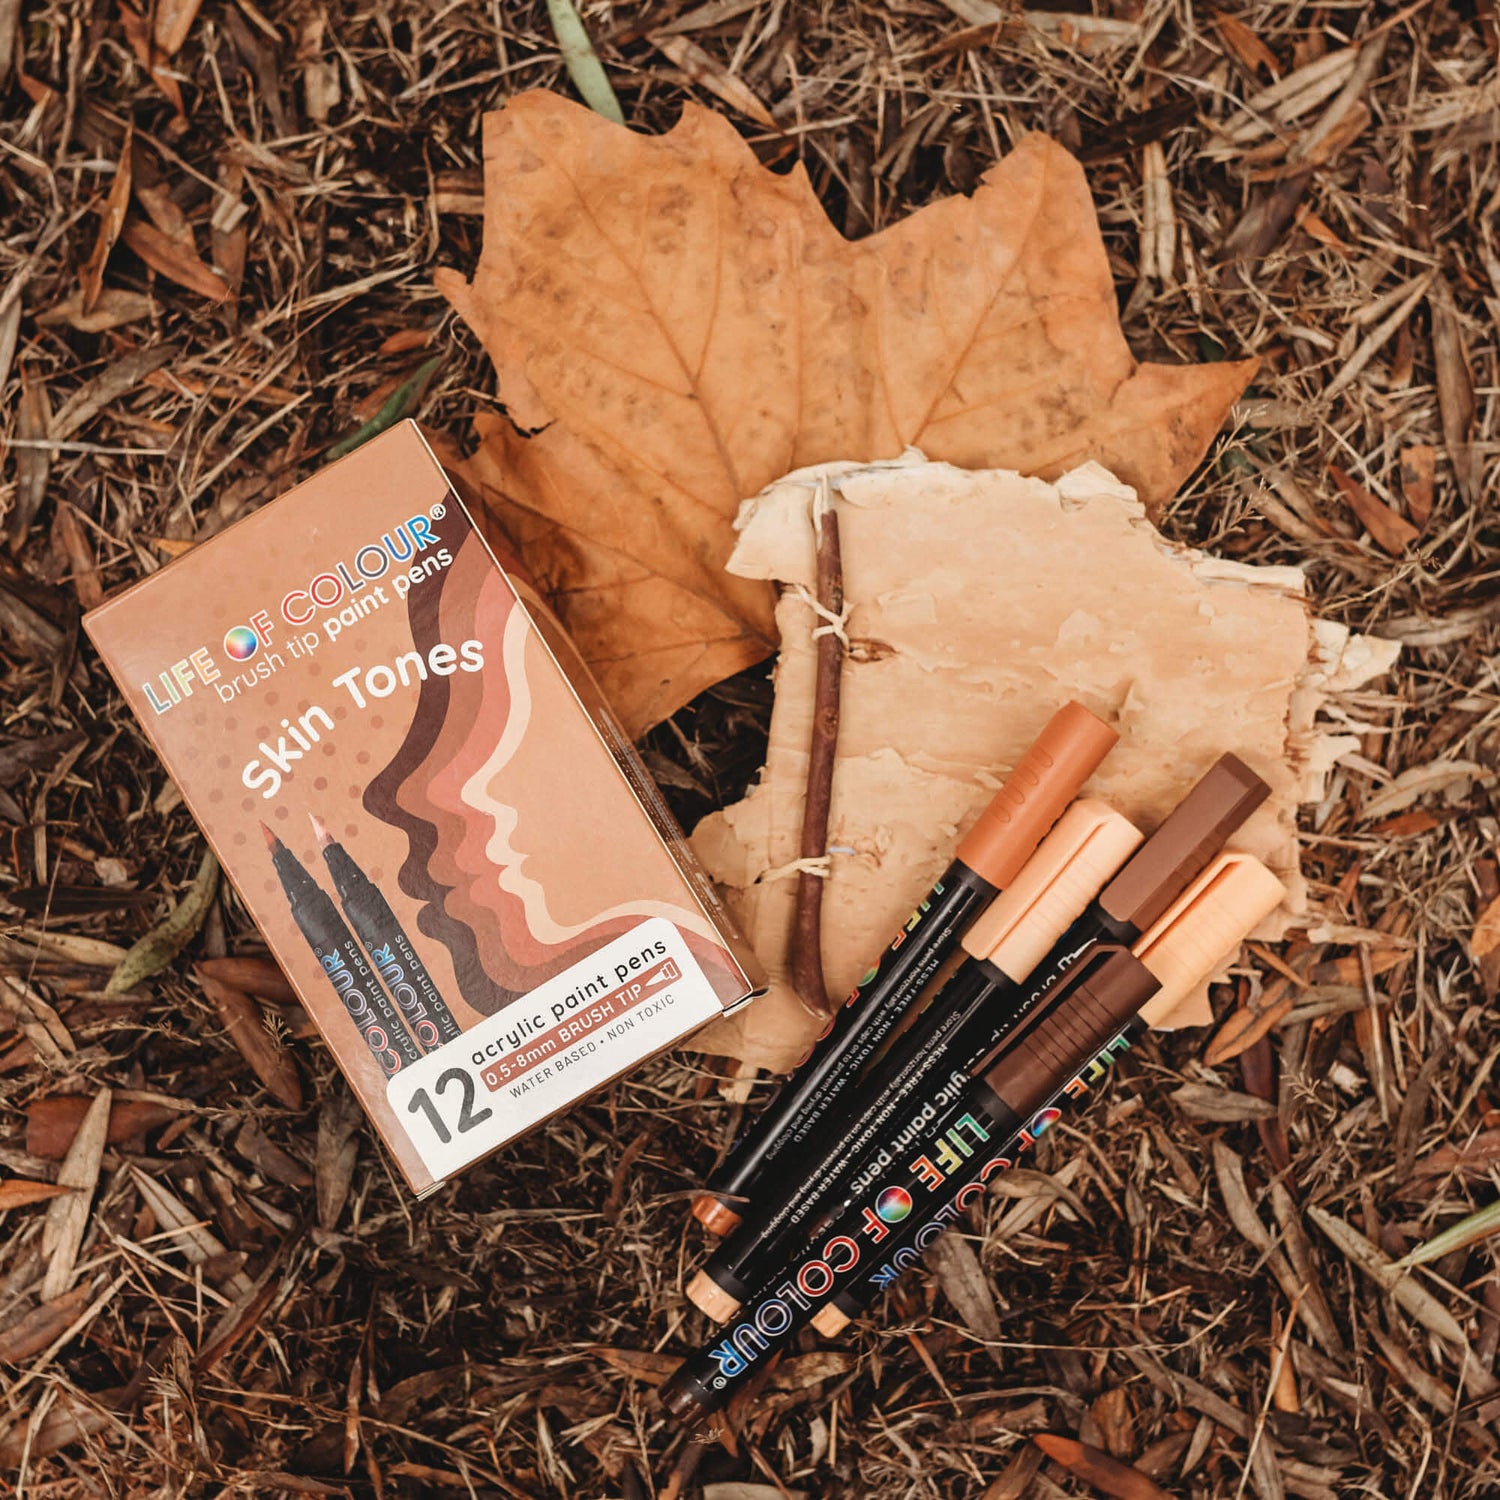 Skin tones brush  tip paint pens from Life of Colour in Your Wild Books shop